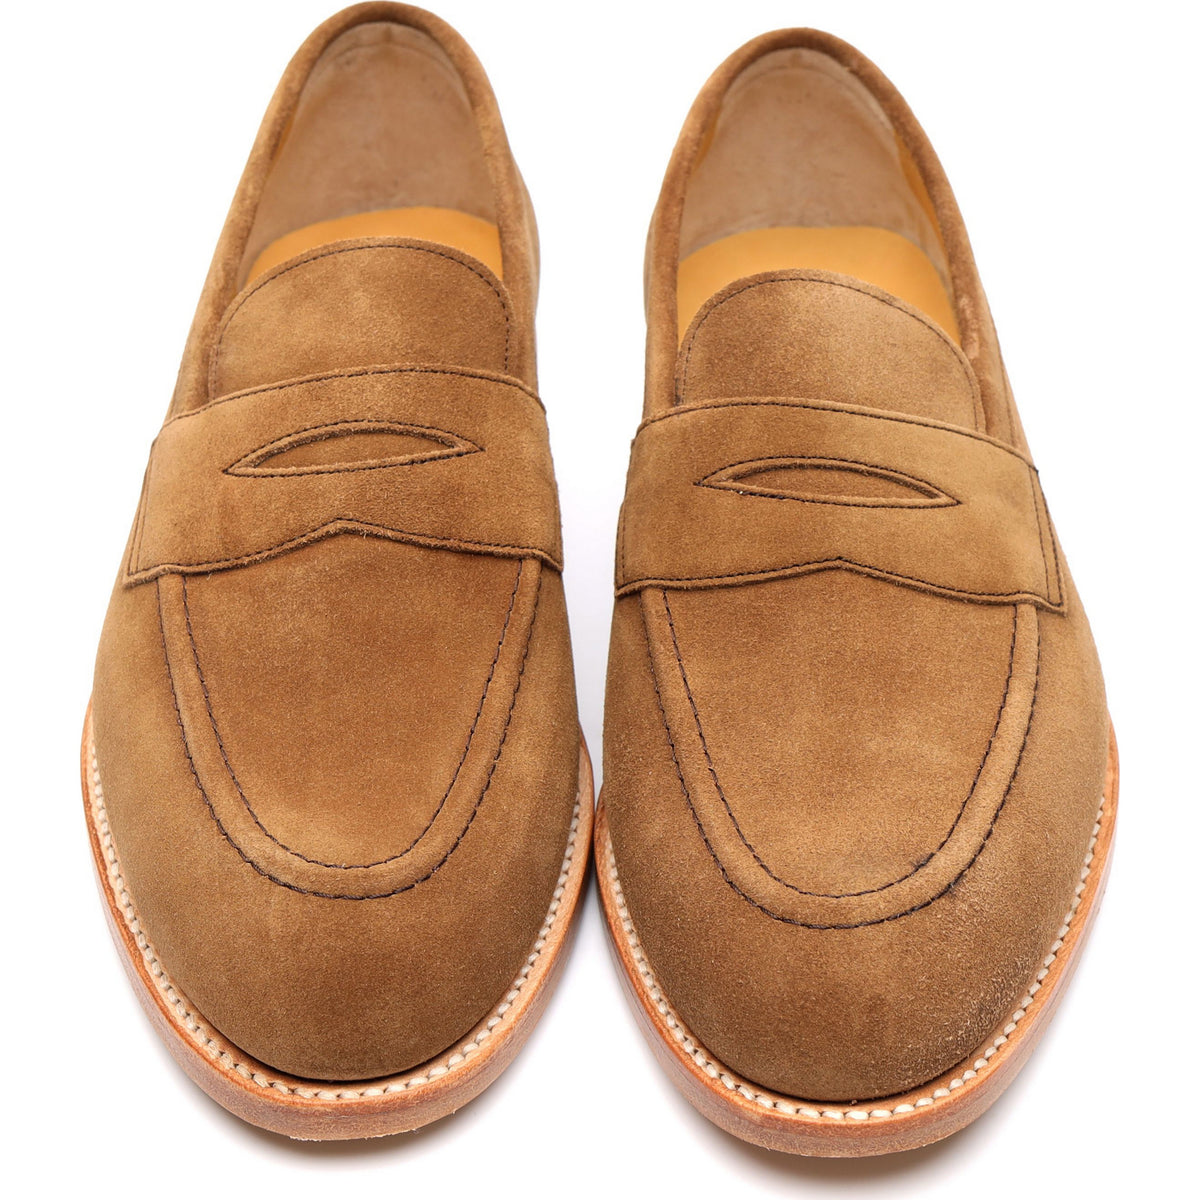 Tan Brown Suede Loafers UK 7